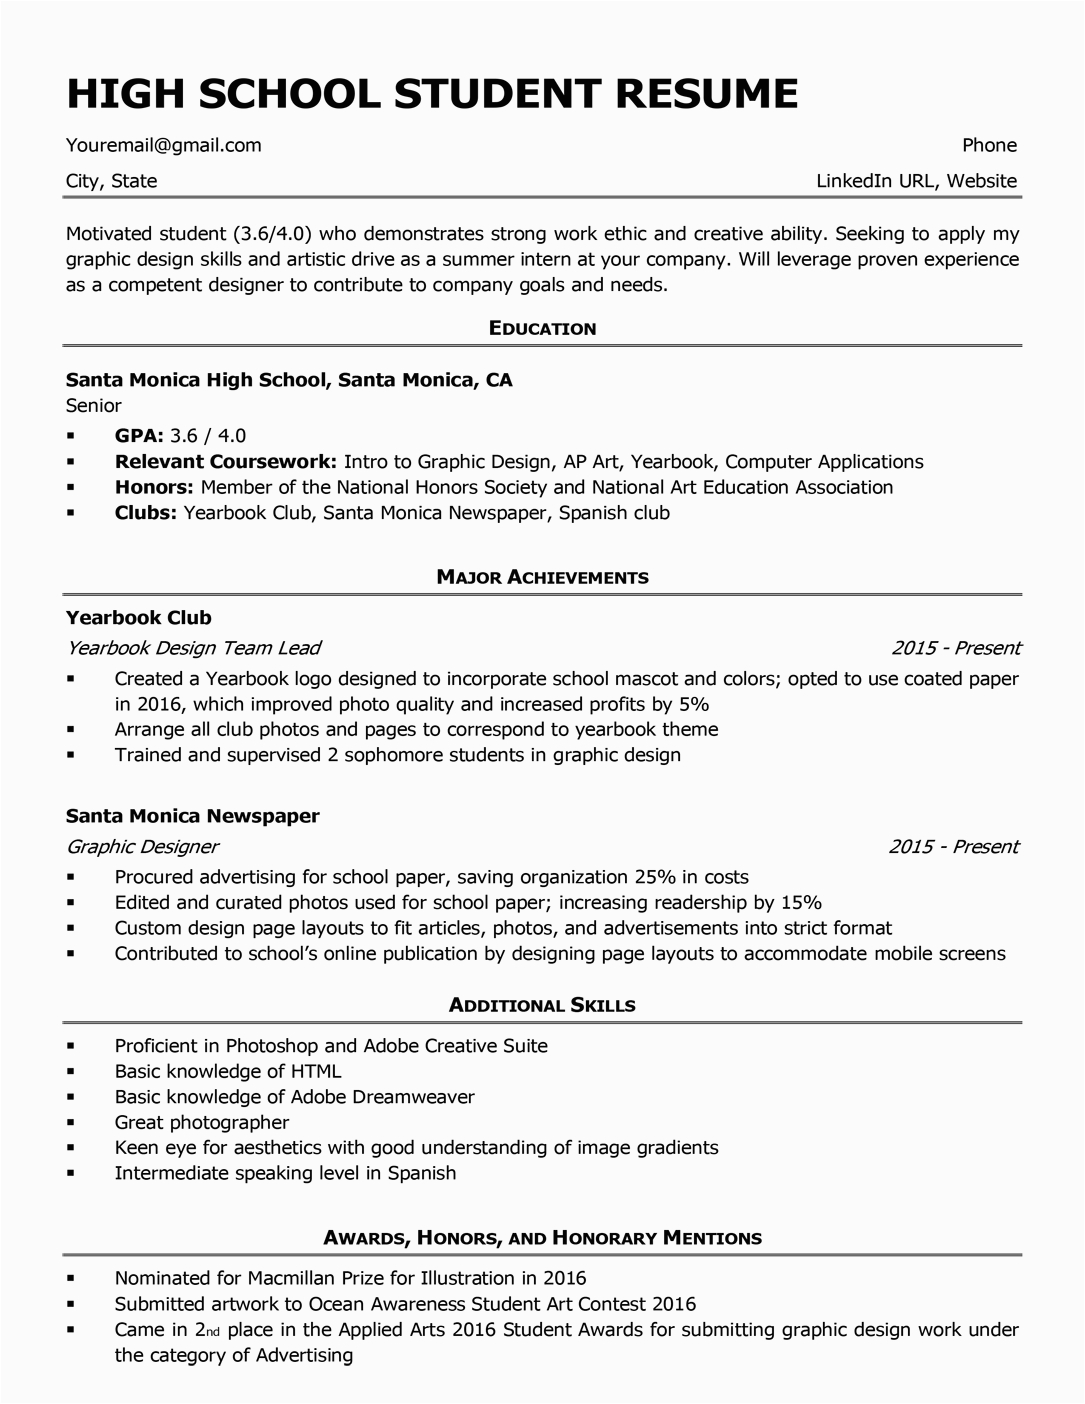 Sample Resume Objectives for High School Students High School Resume Template & Writing Tips